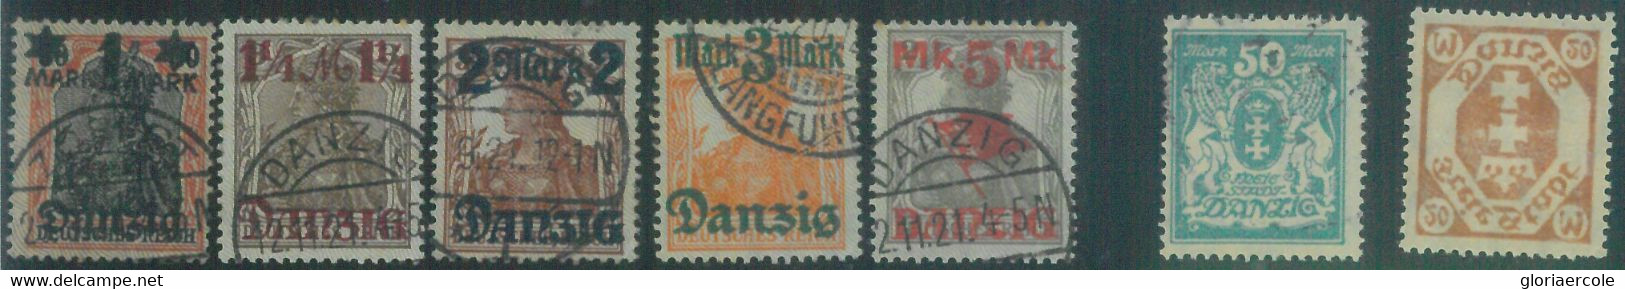 88258 - POLAND Danzig - STAMP  - Small  Lot Of USED STAMPS - Besatzungszeit